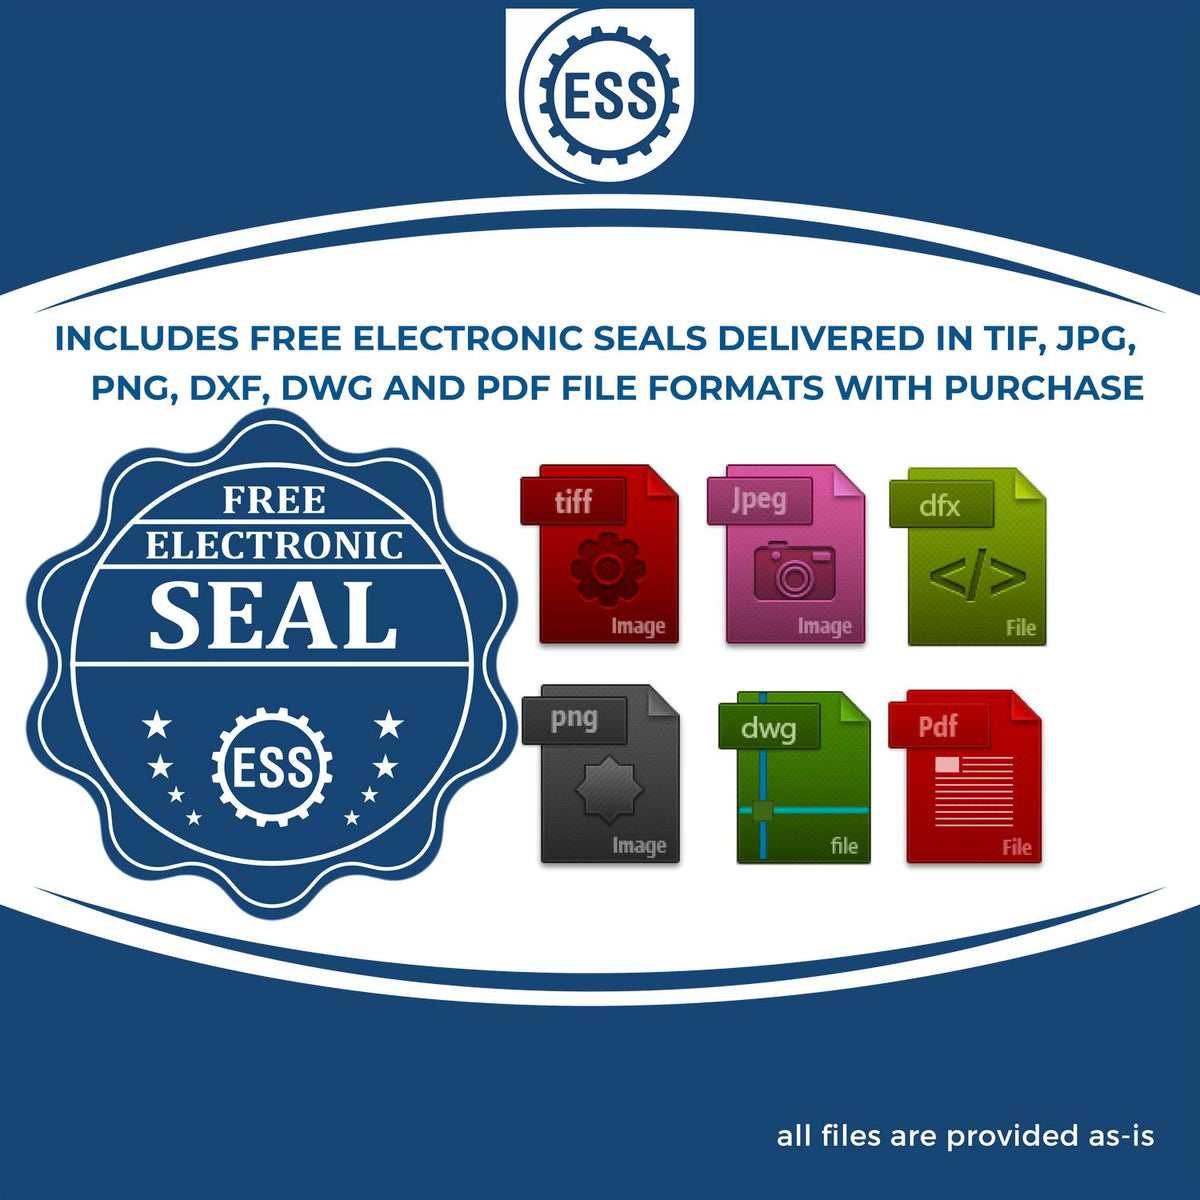 An infographic for the free electronic seal for the District of Columbia Engineer Desk Seal illustrating the different file type icons such as DXF, DWG, TIF, JPG and PNG.